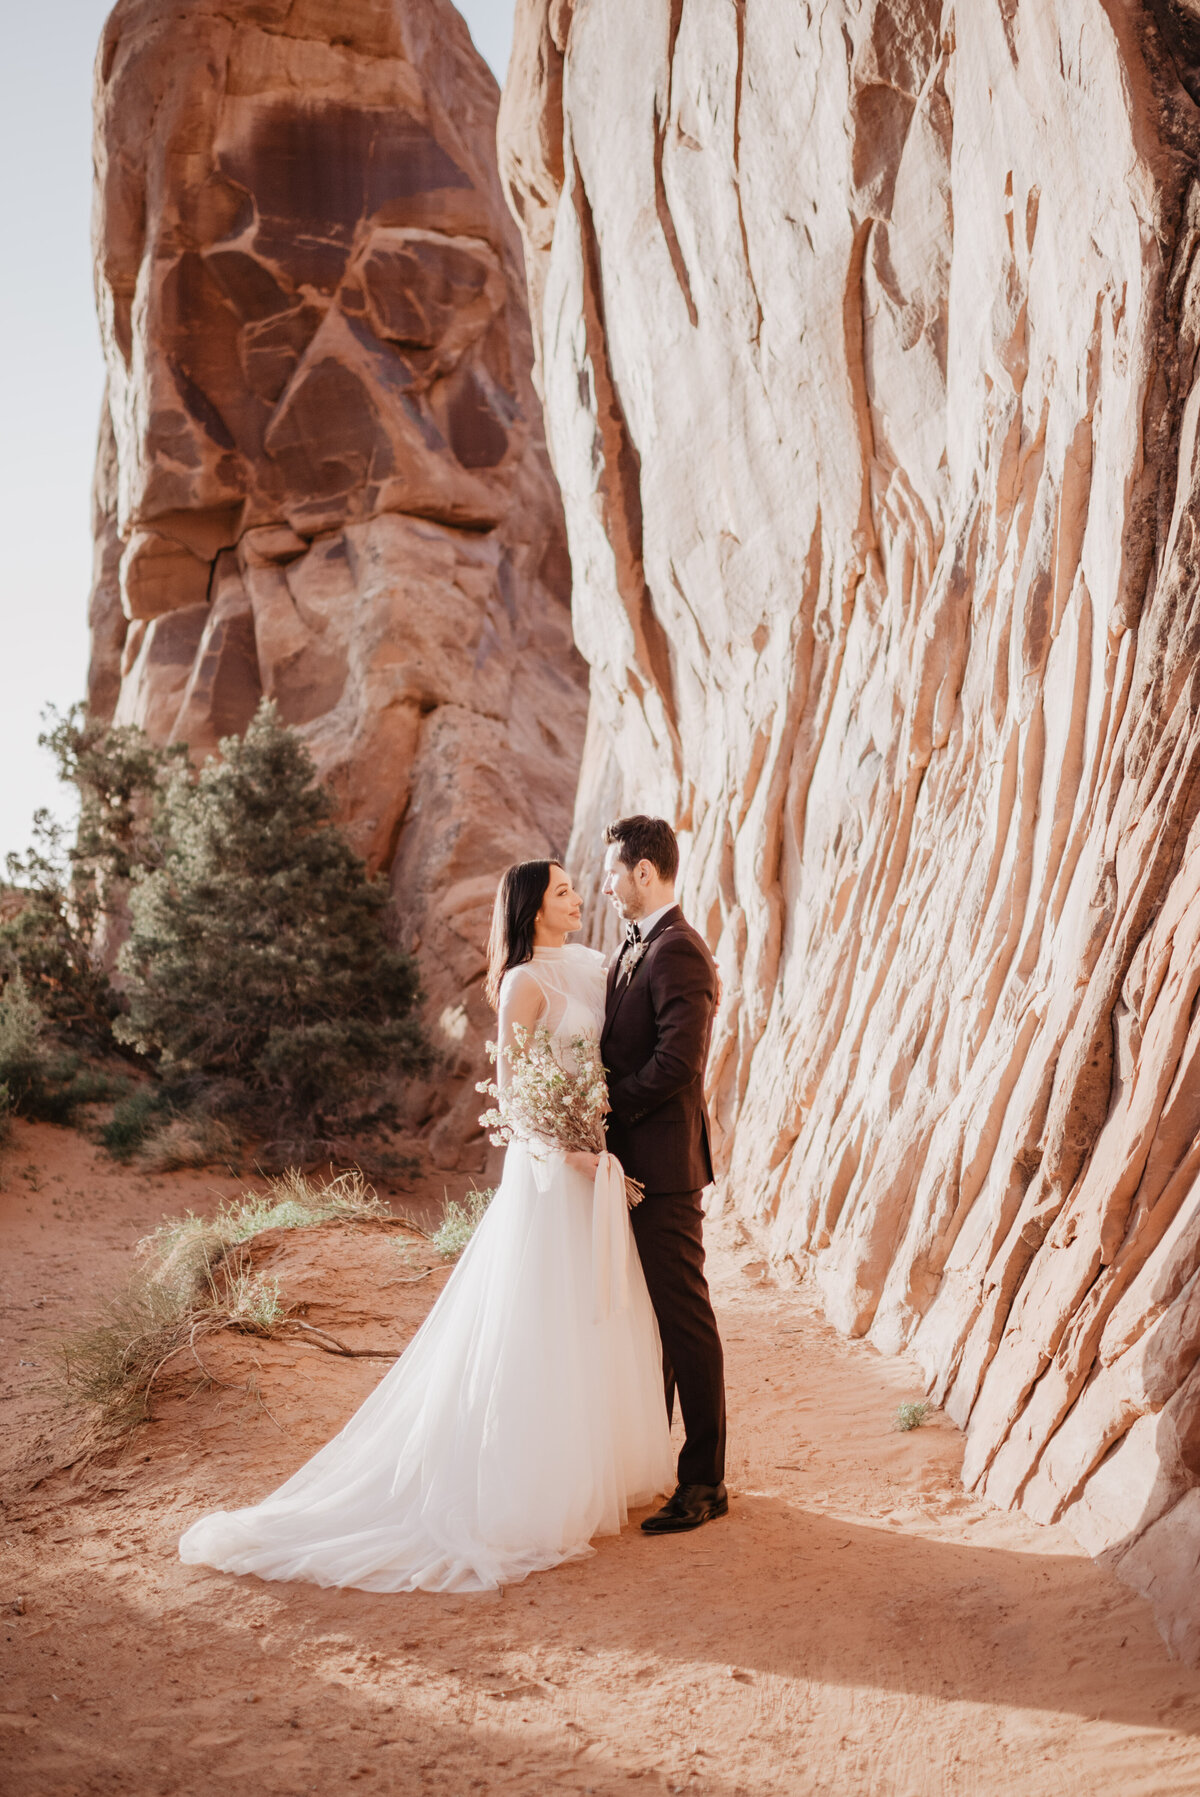 Utah elopement photographer captures couple hugging and looking at one another